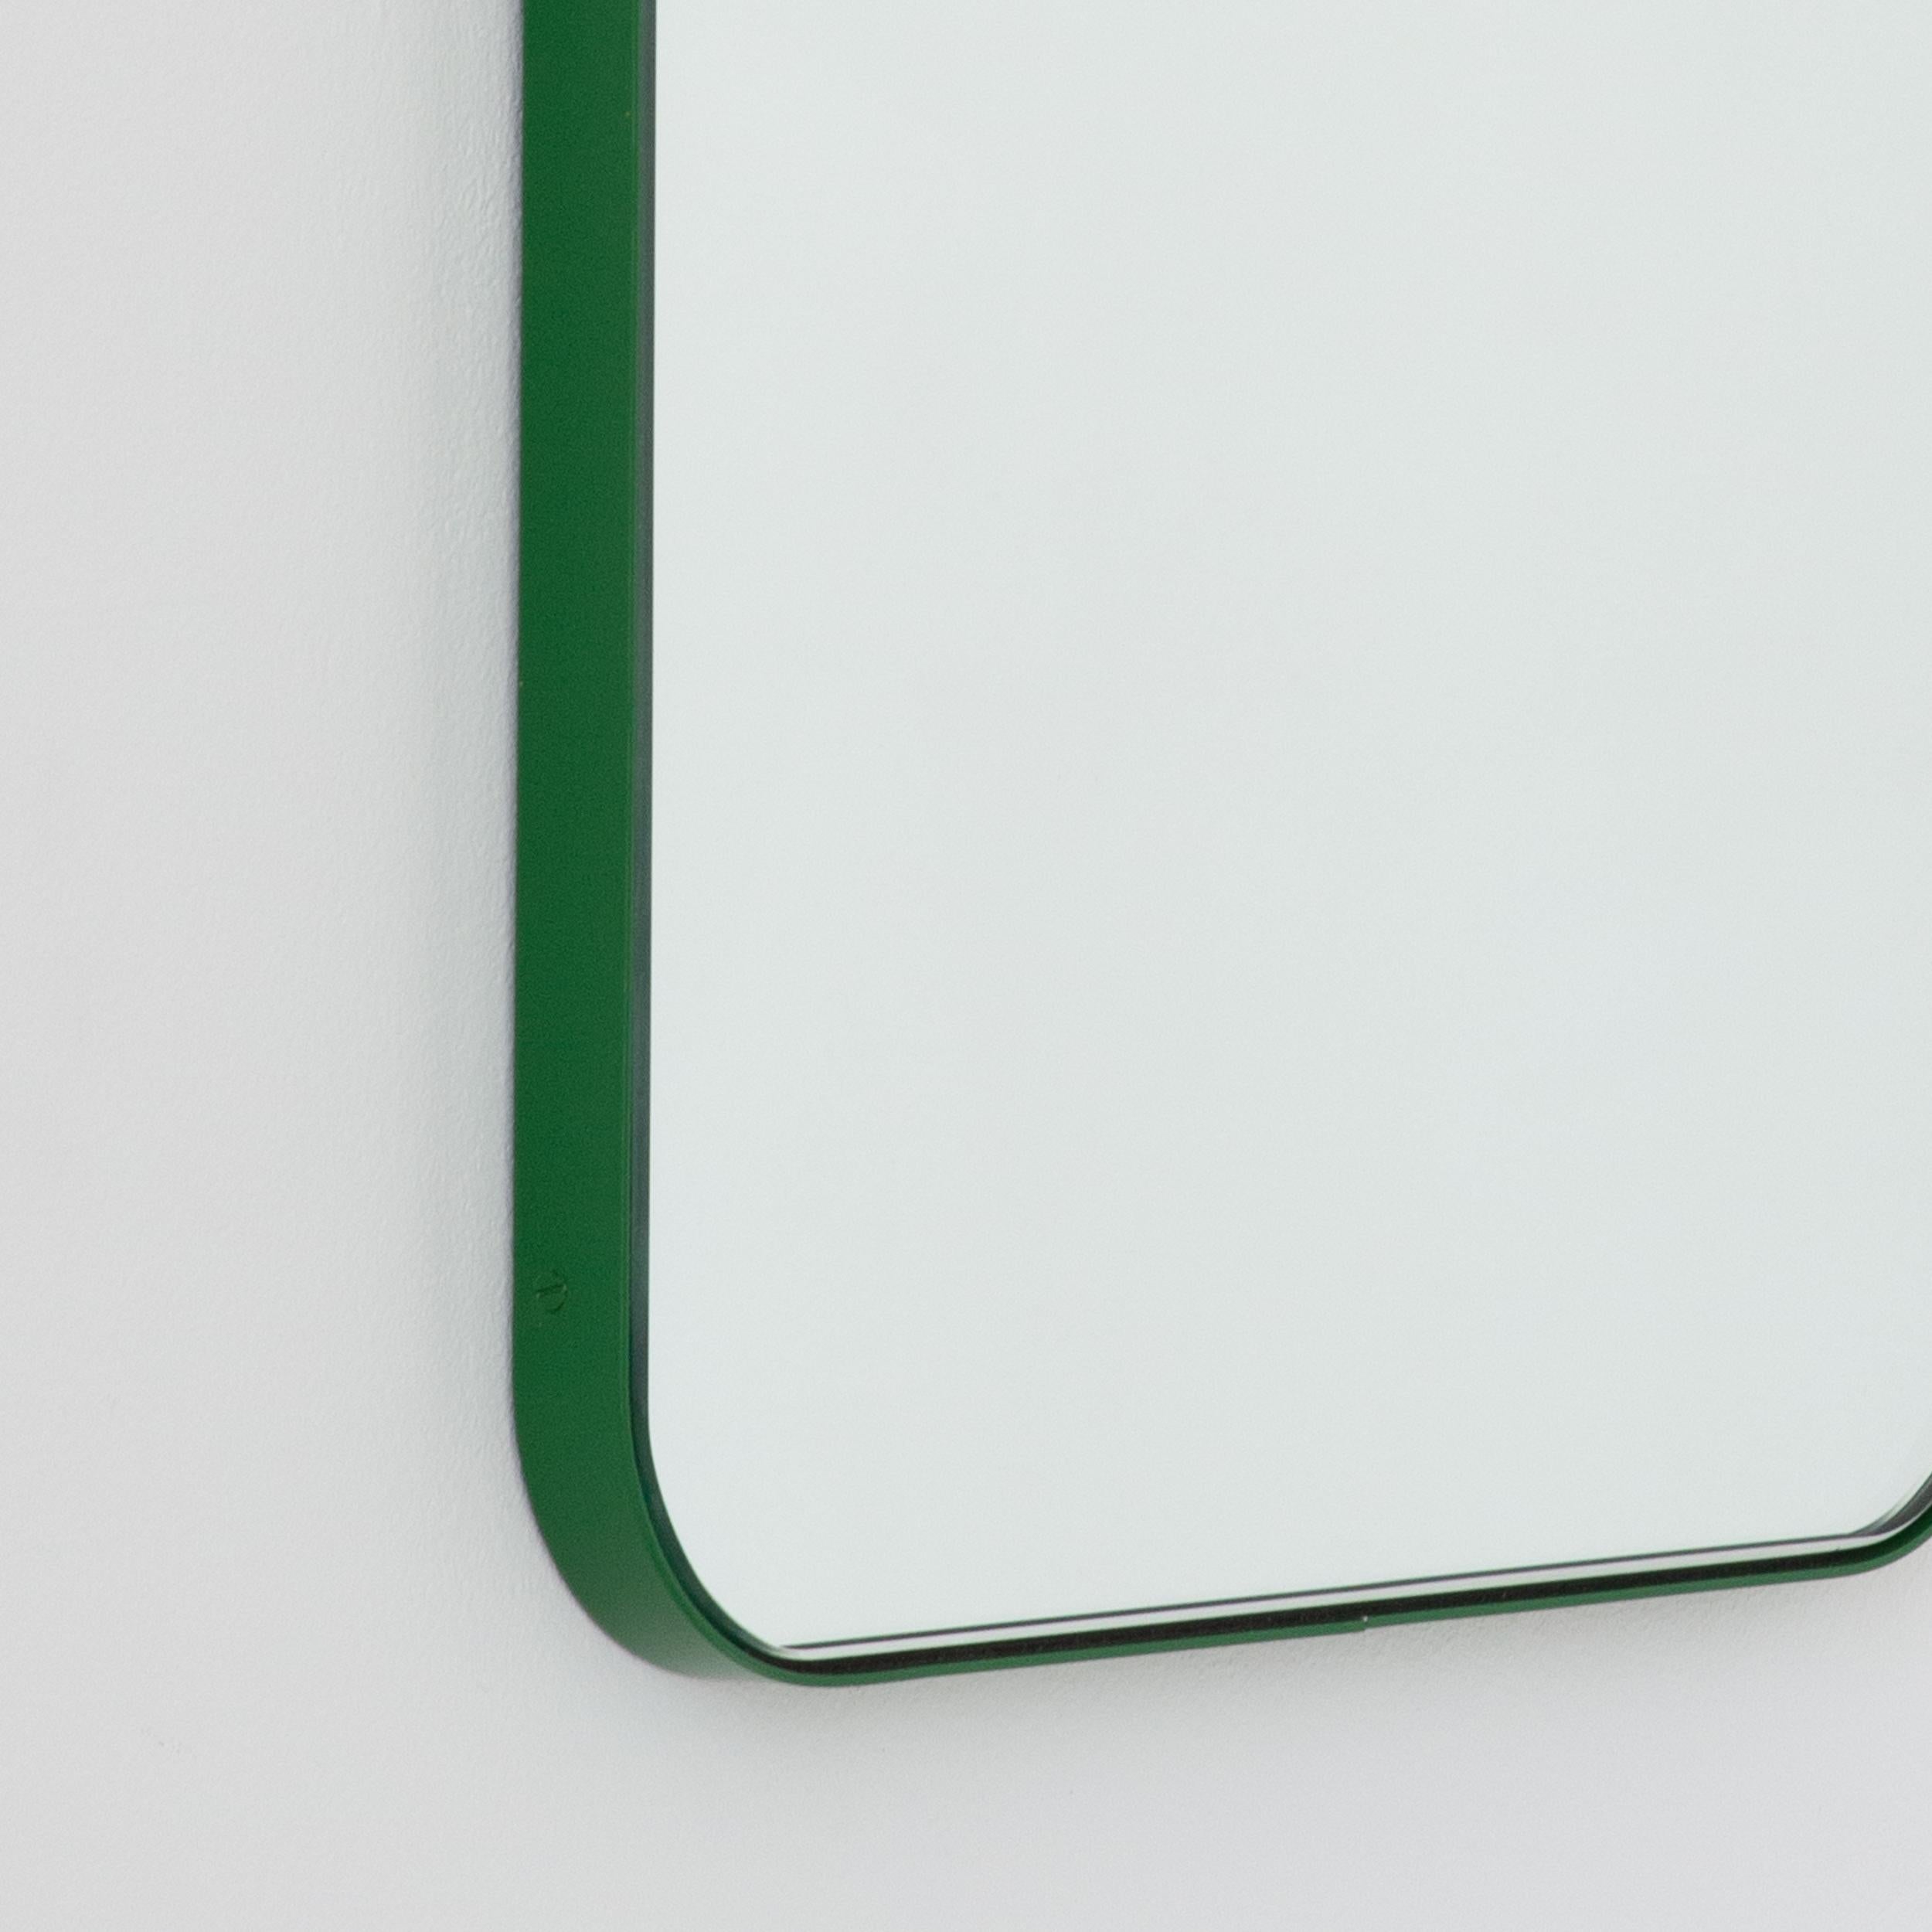 Contemporary Quadris Rectangular Modern Mirror with a Green Frame, Large For Sale